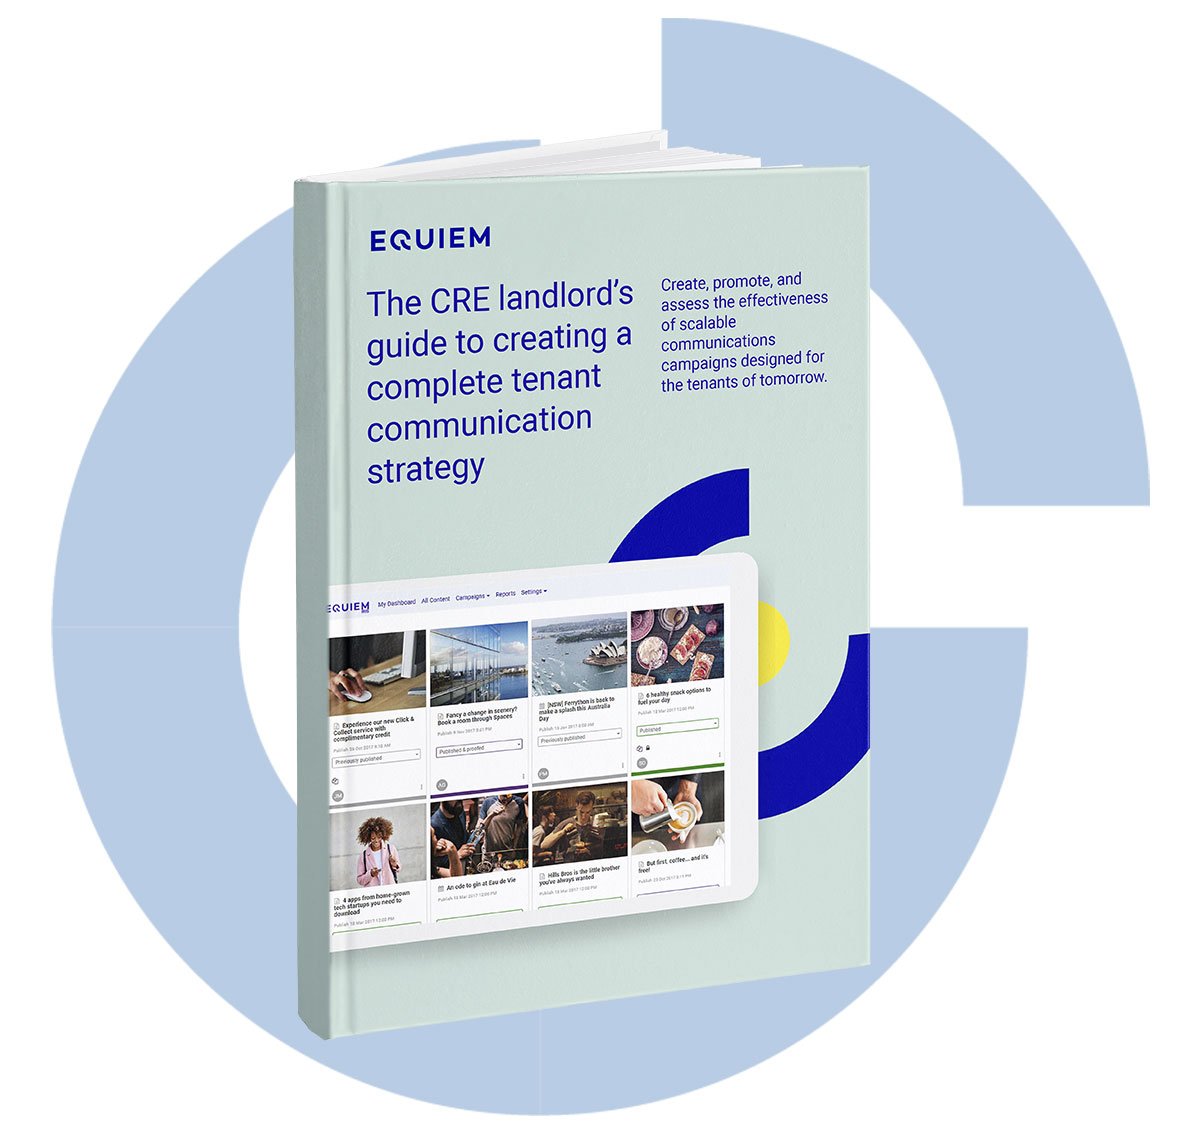 Equiem-guide-cre-landlords-to-communications-strategy-ebook